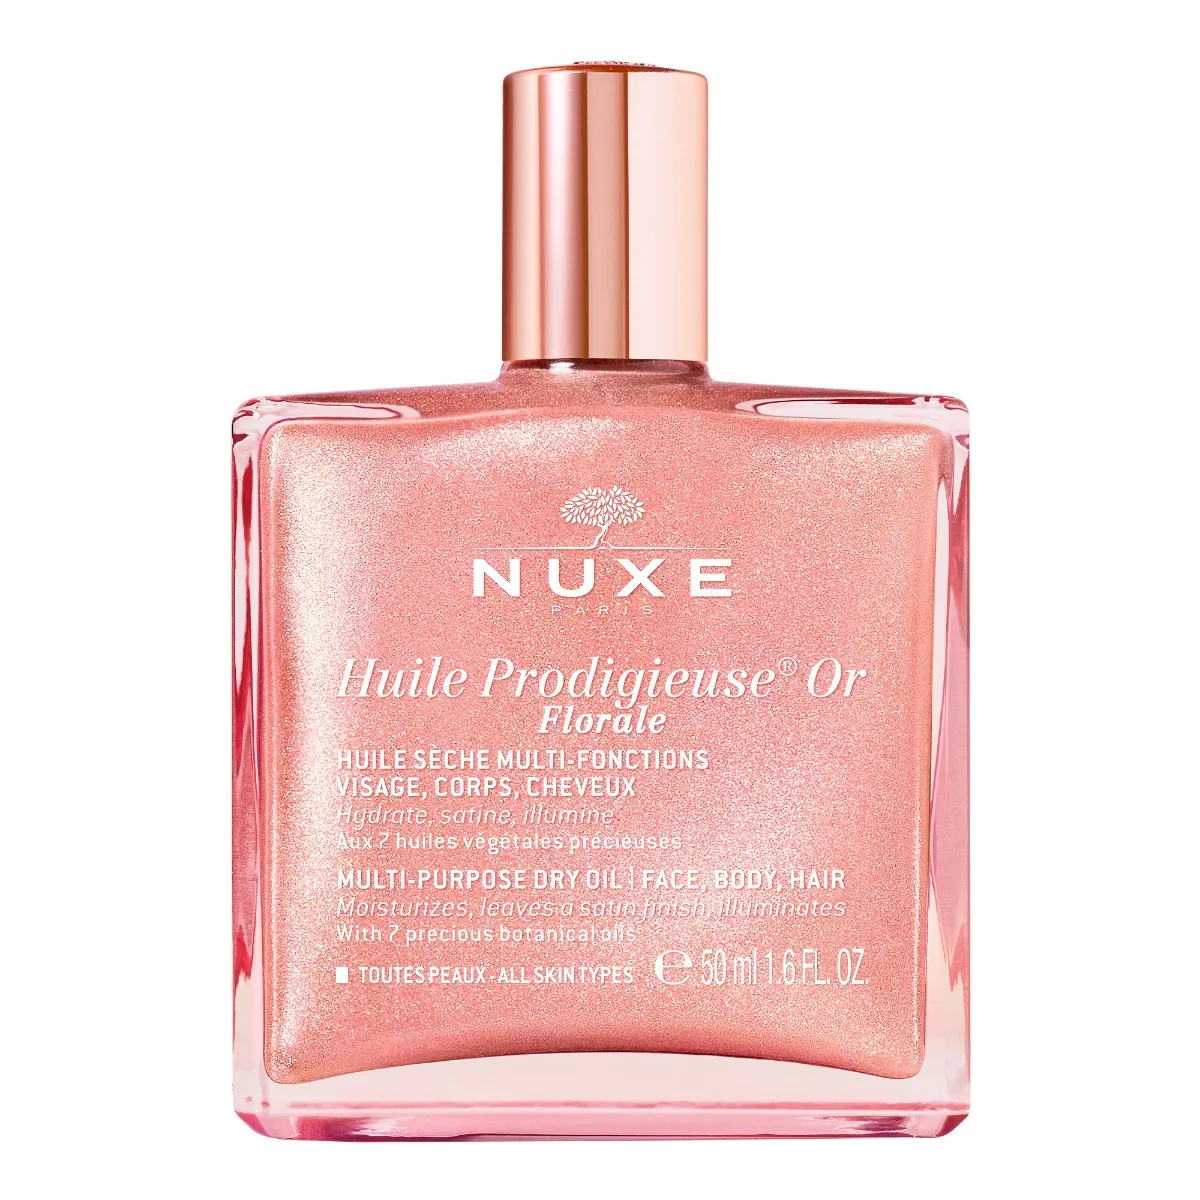 nuxe-huile-prodigieuse-or-florale-50ml-3264680038334